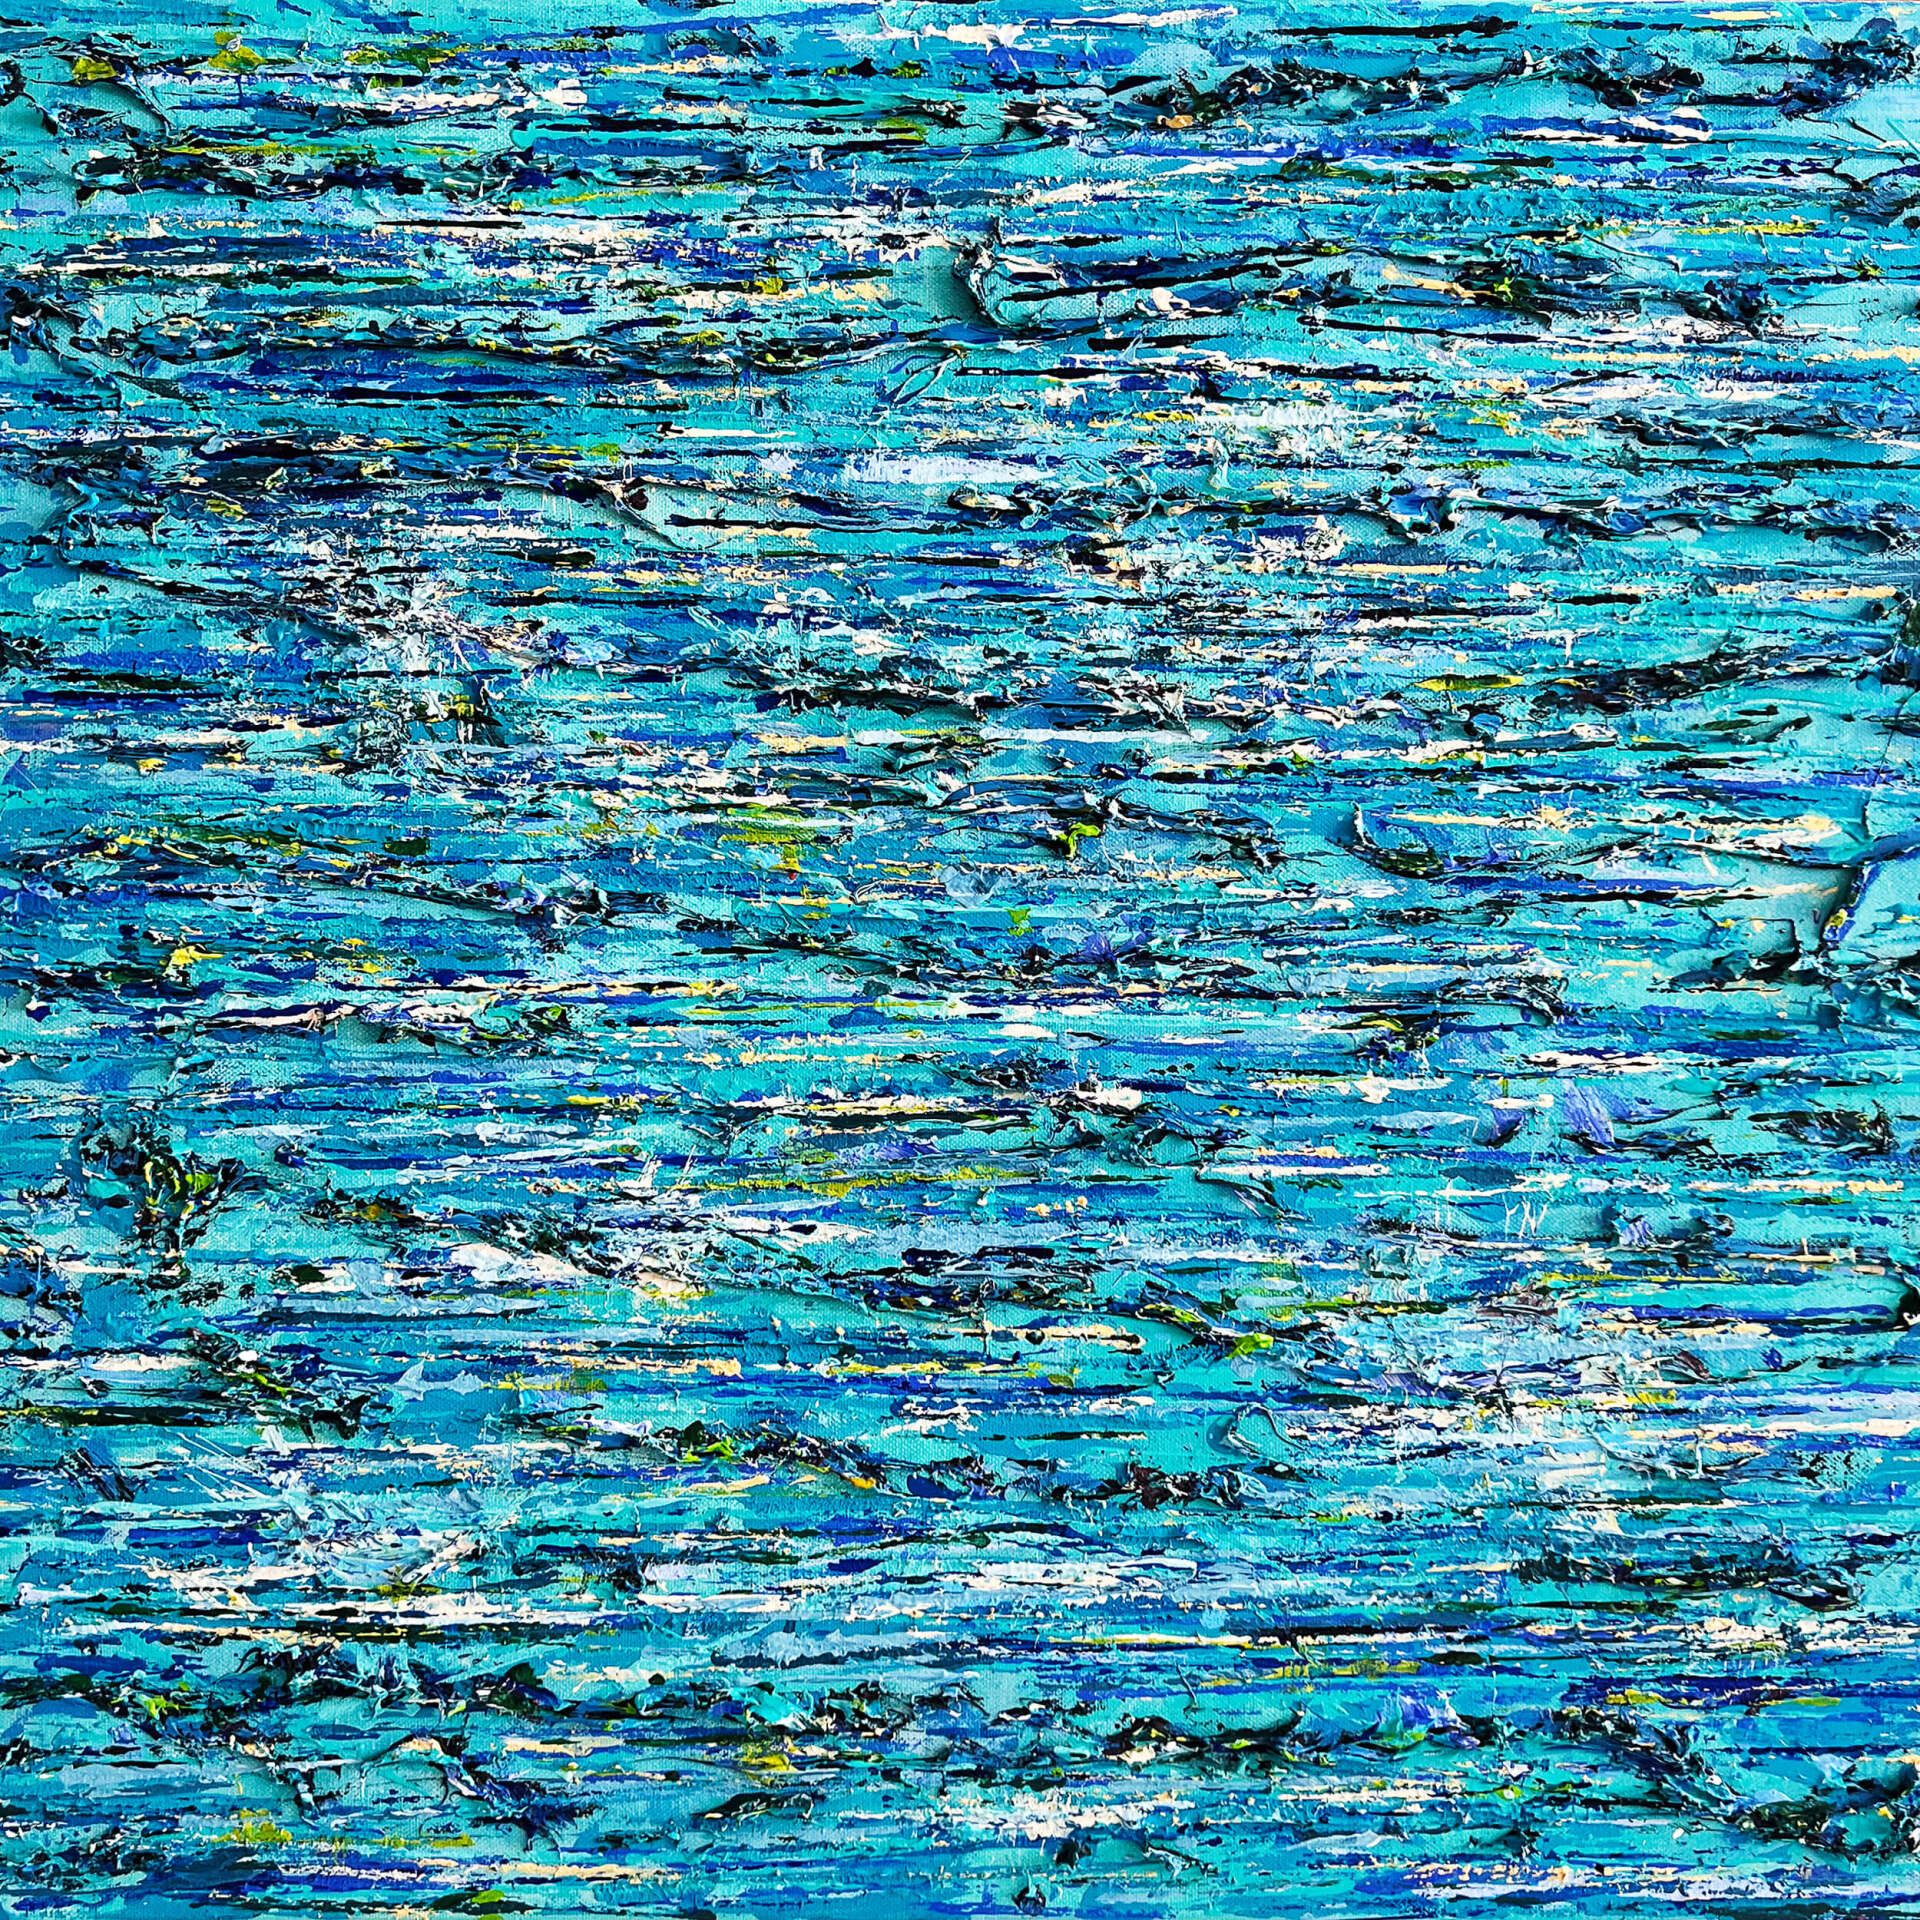 Turquoise and blues abstract painting with raised textures